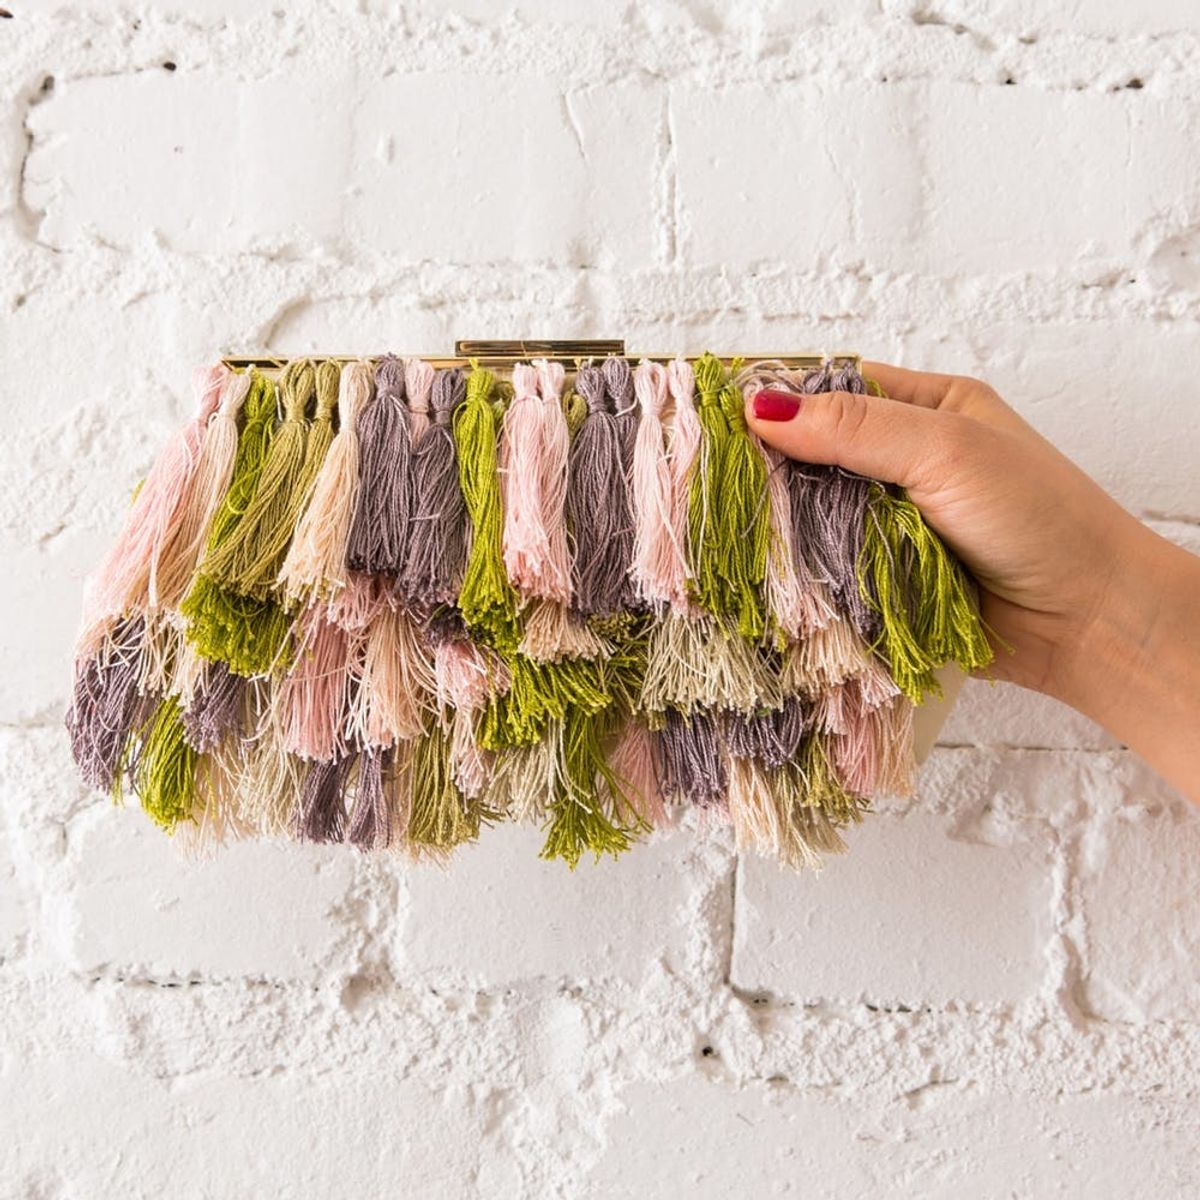 Make This Anthro-Inspired Fringe Purse Without the $228 Price Tag